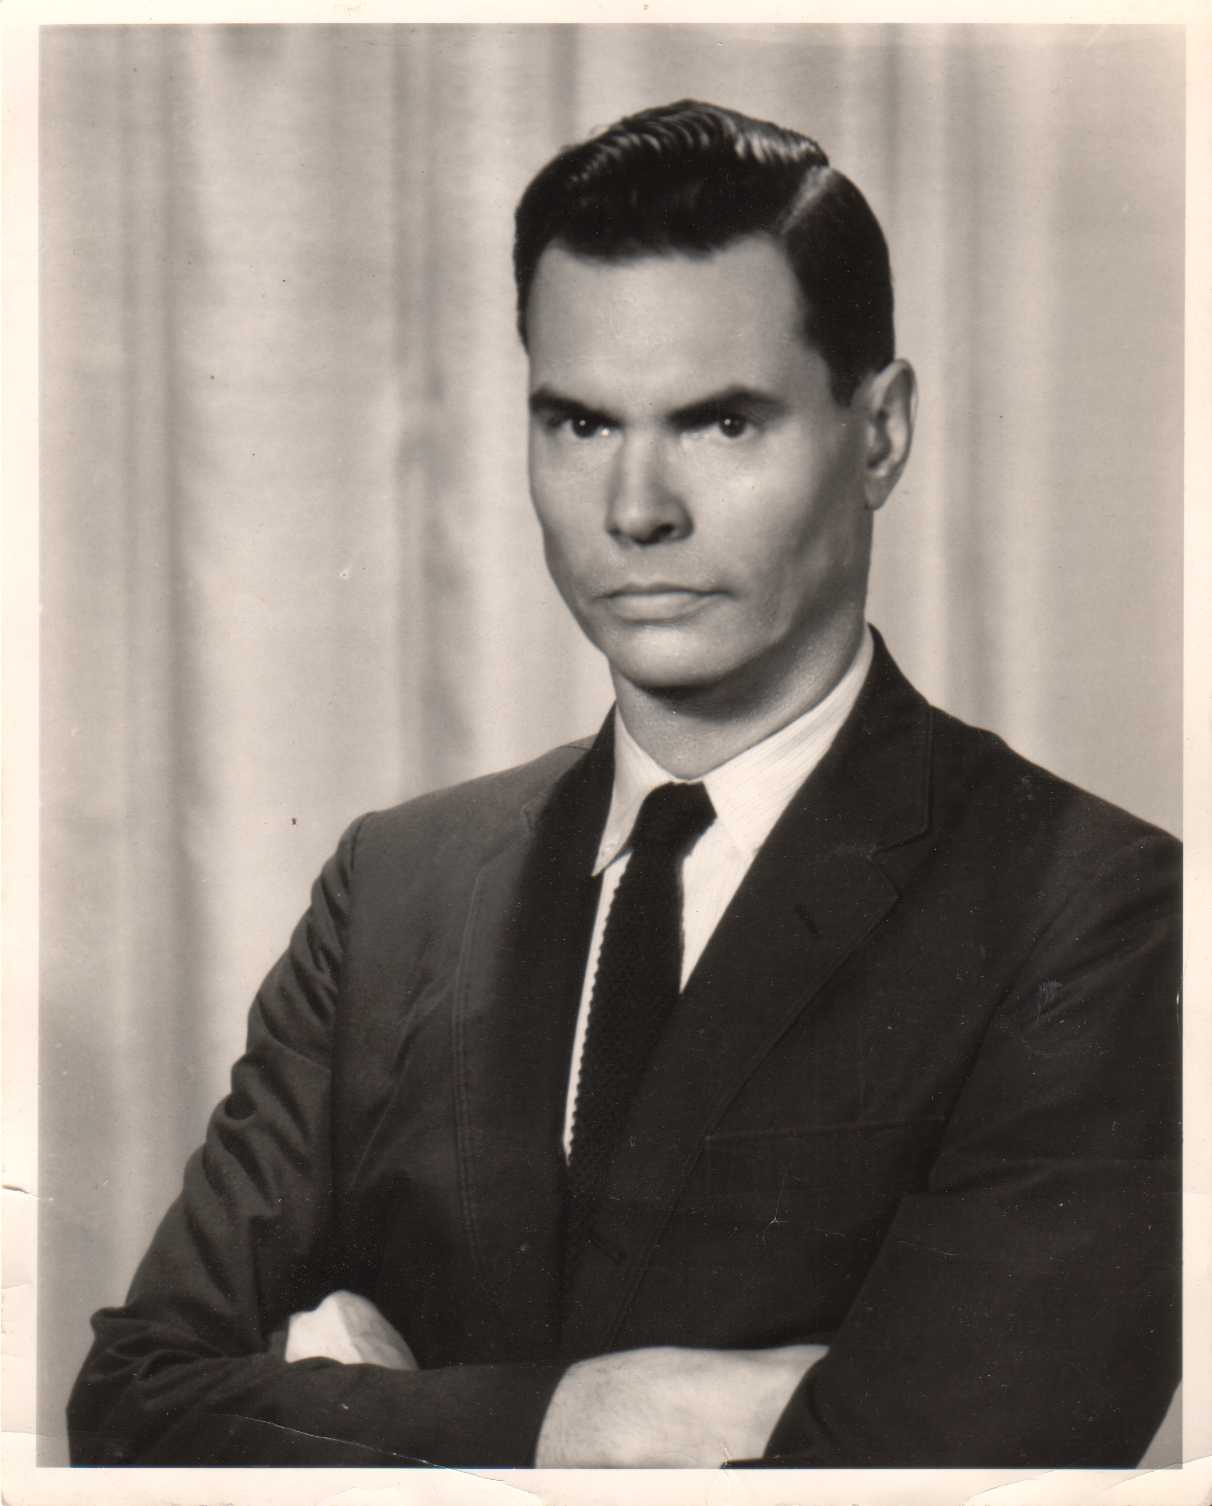 Commander George Lincoln Rockwell